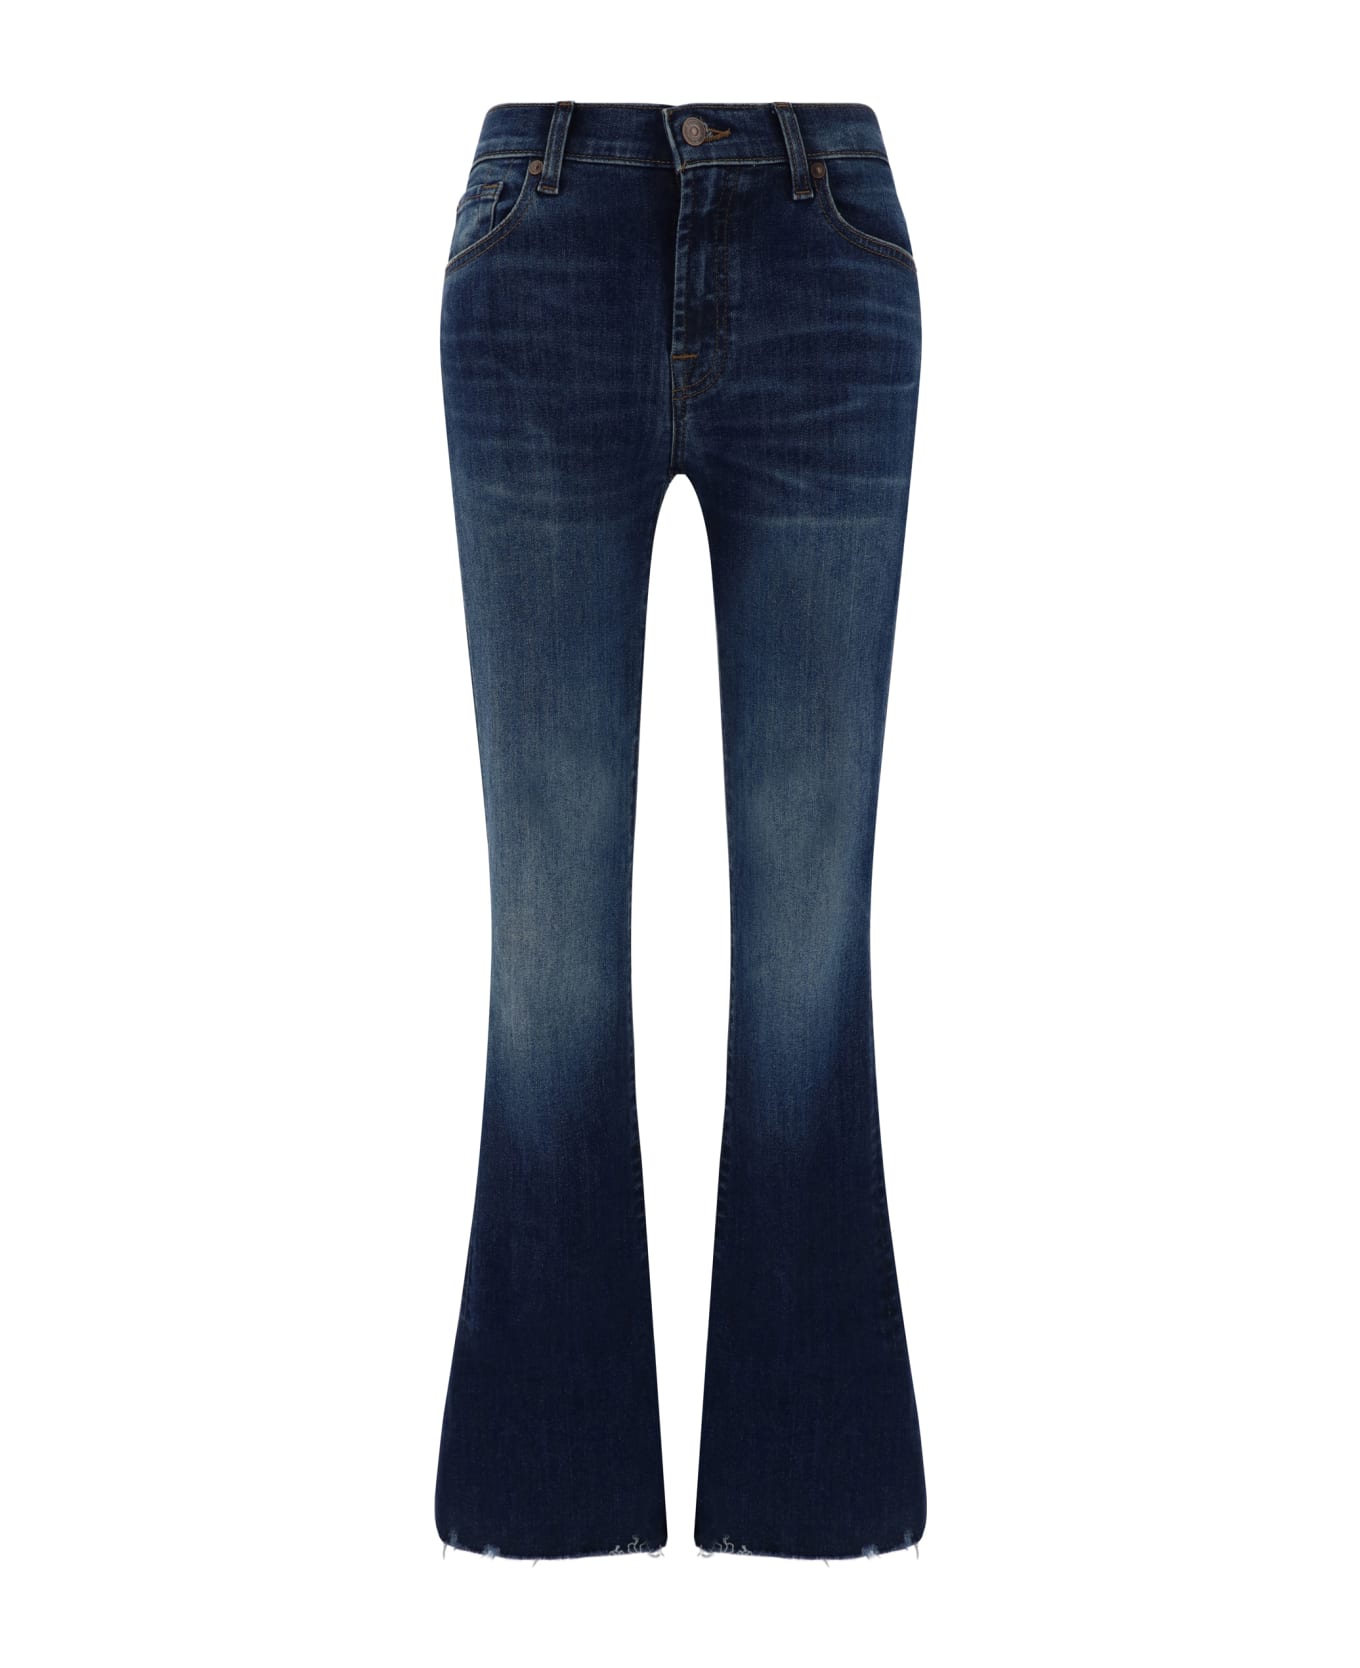 7 For All Mankind Jeans - Dark Blue デニム